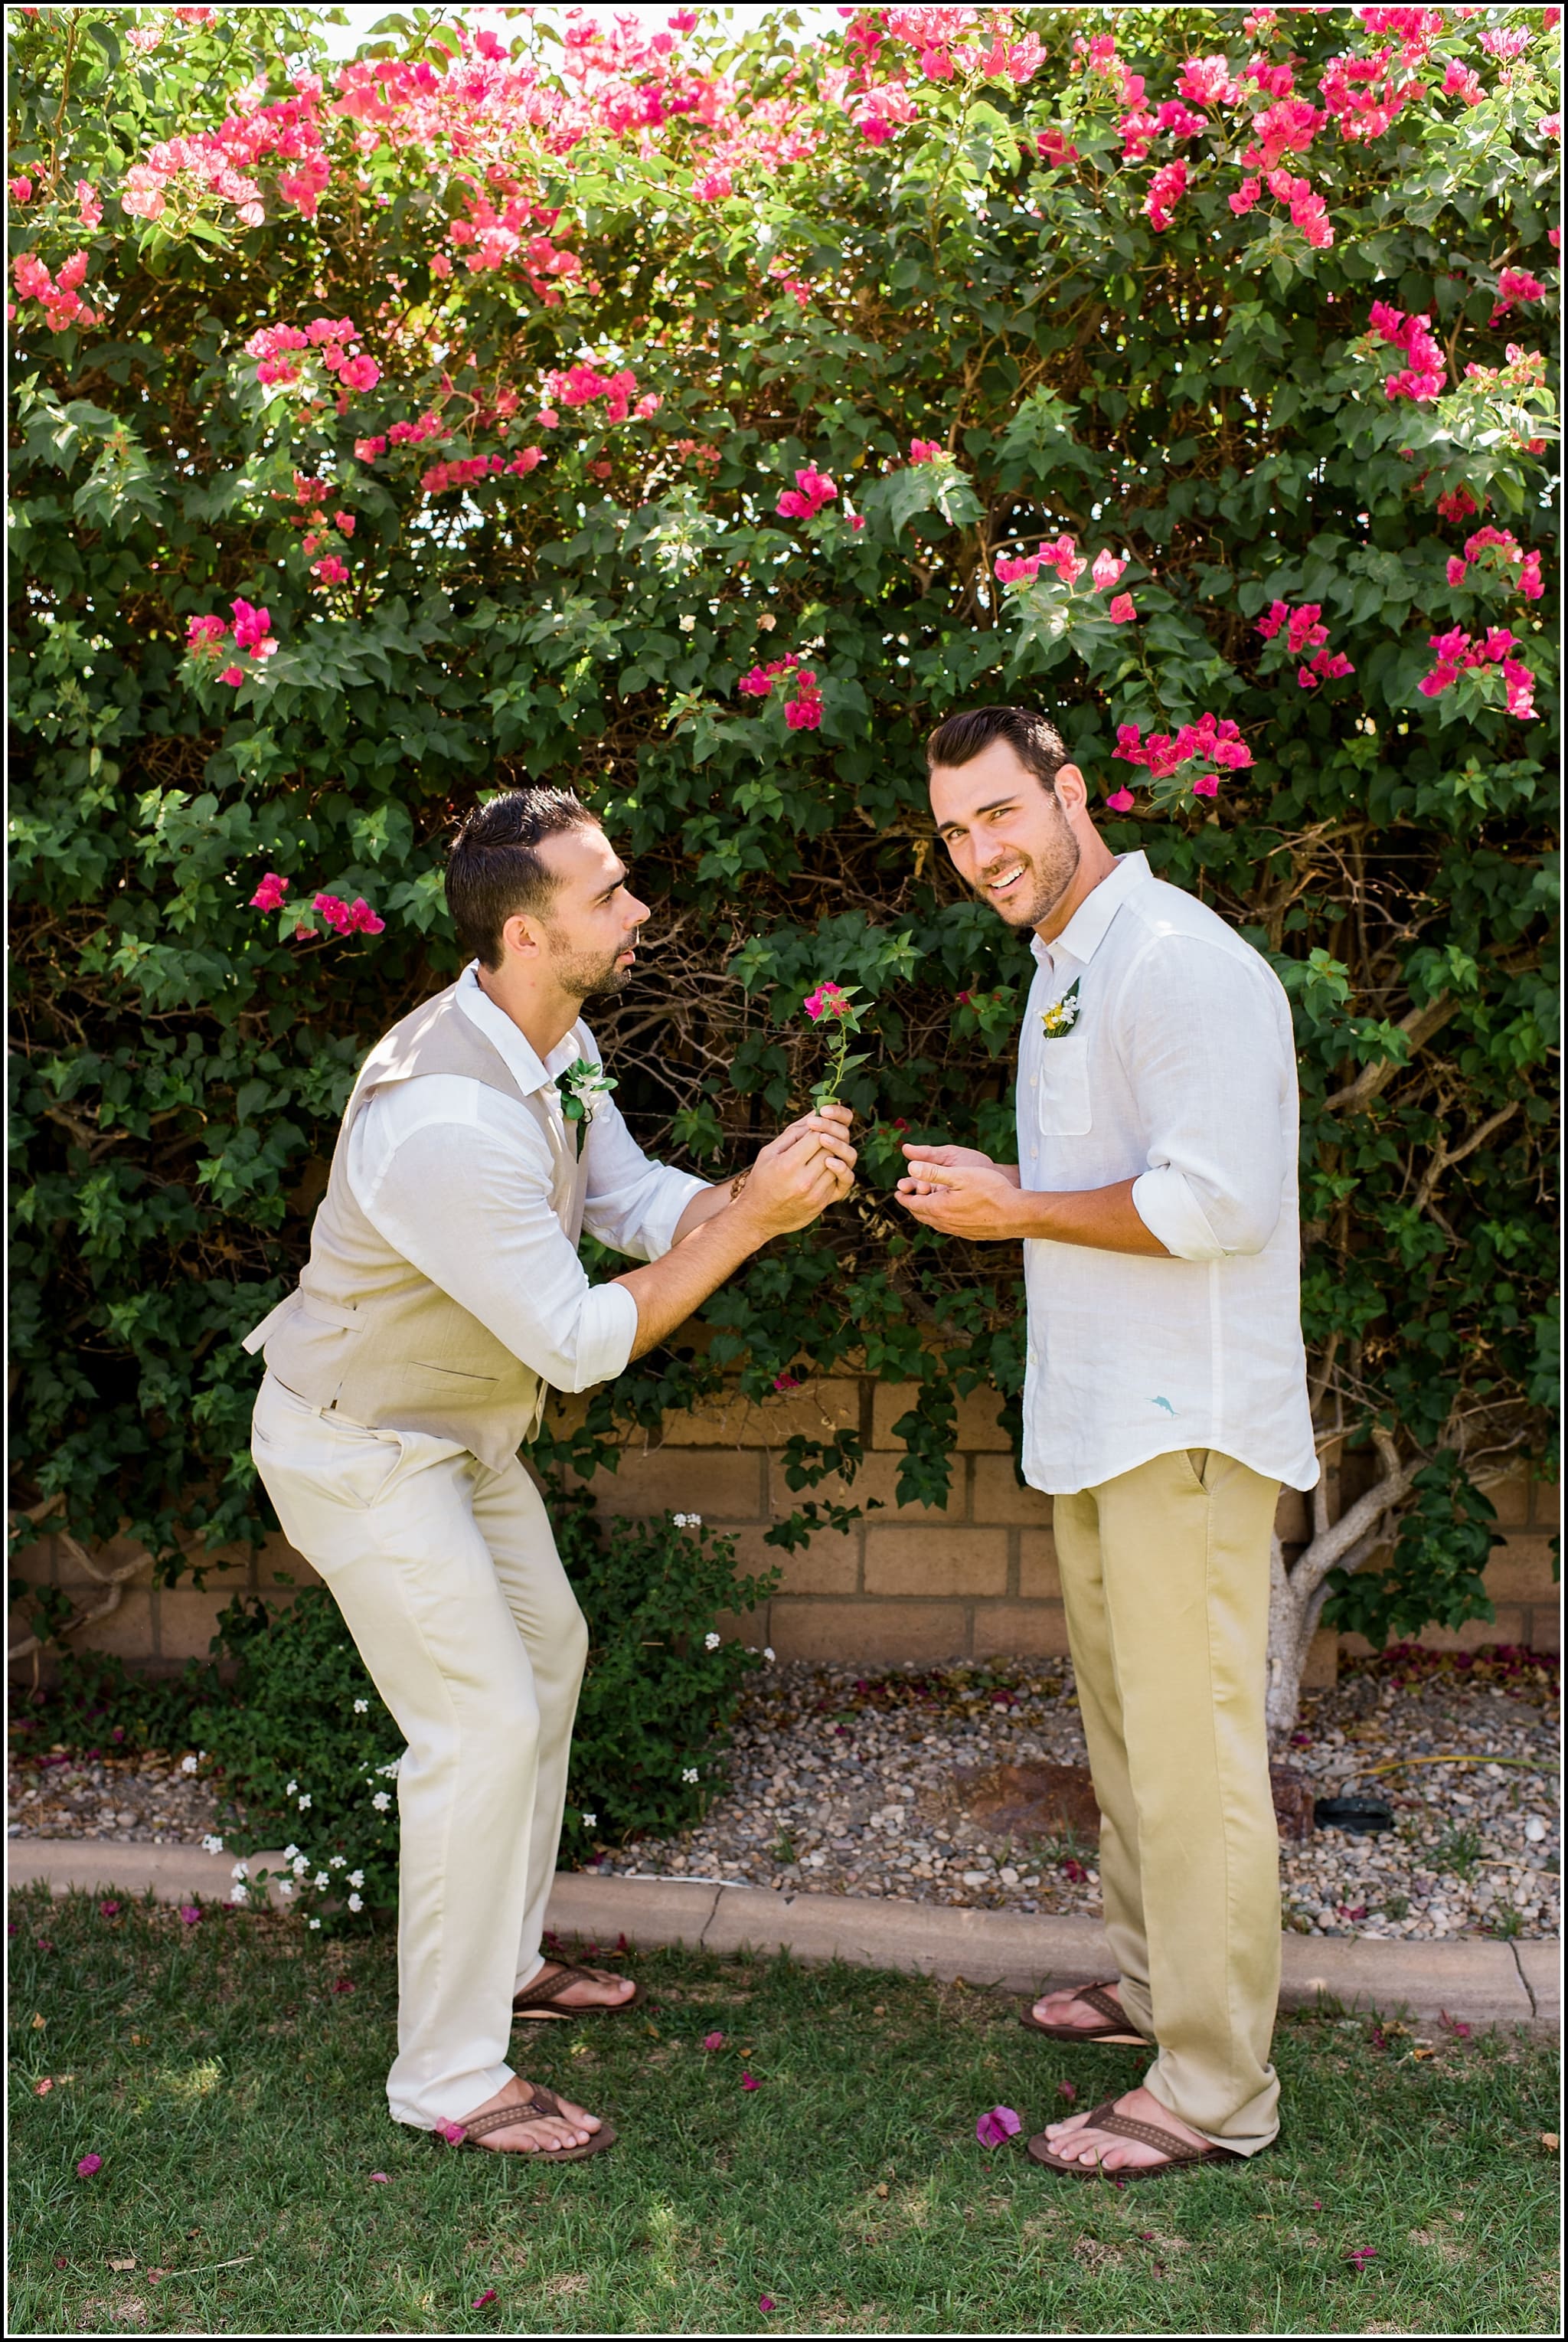  favorite wedding images 2016, wedding photos from 2016, our favorite wedding photos, the bachelor, the bachelorette, giving a bachelor a rose